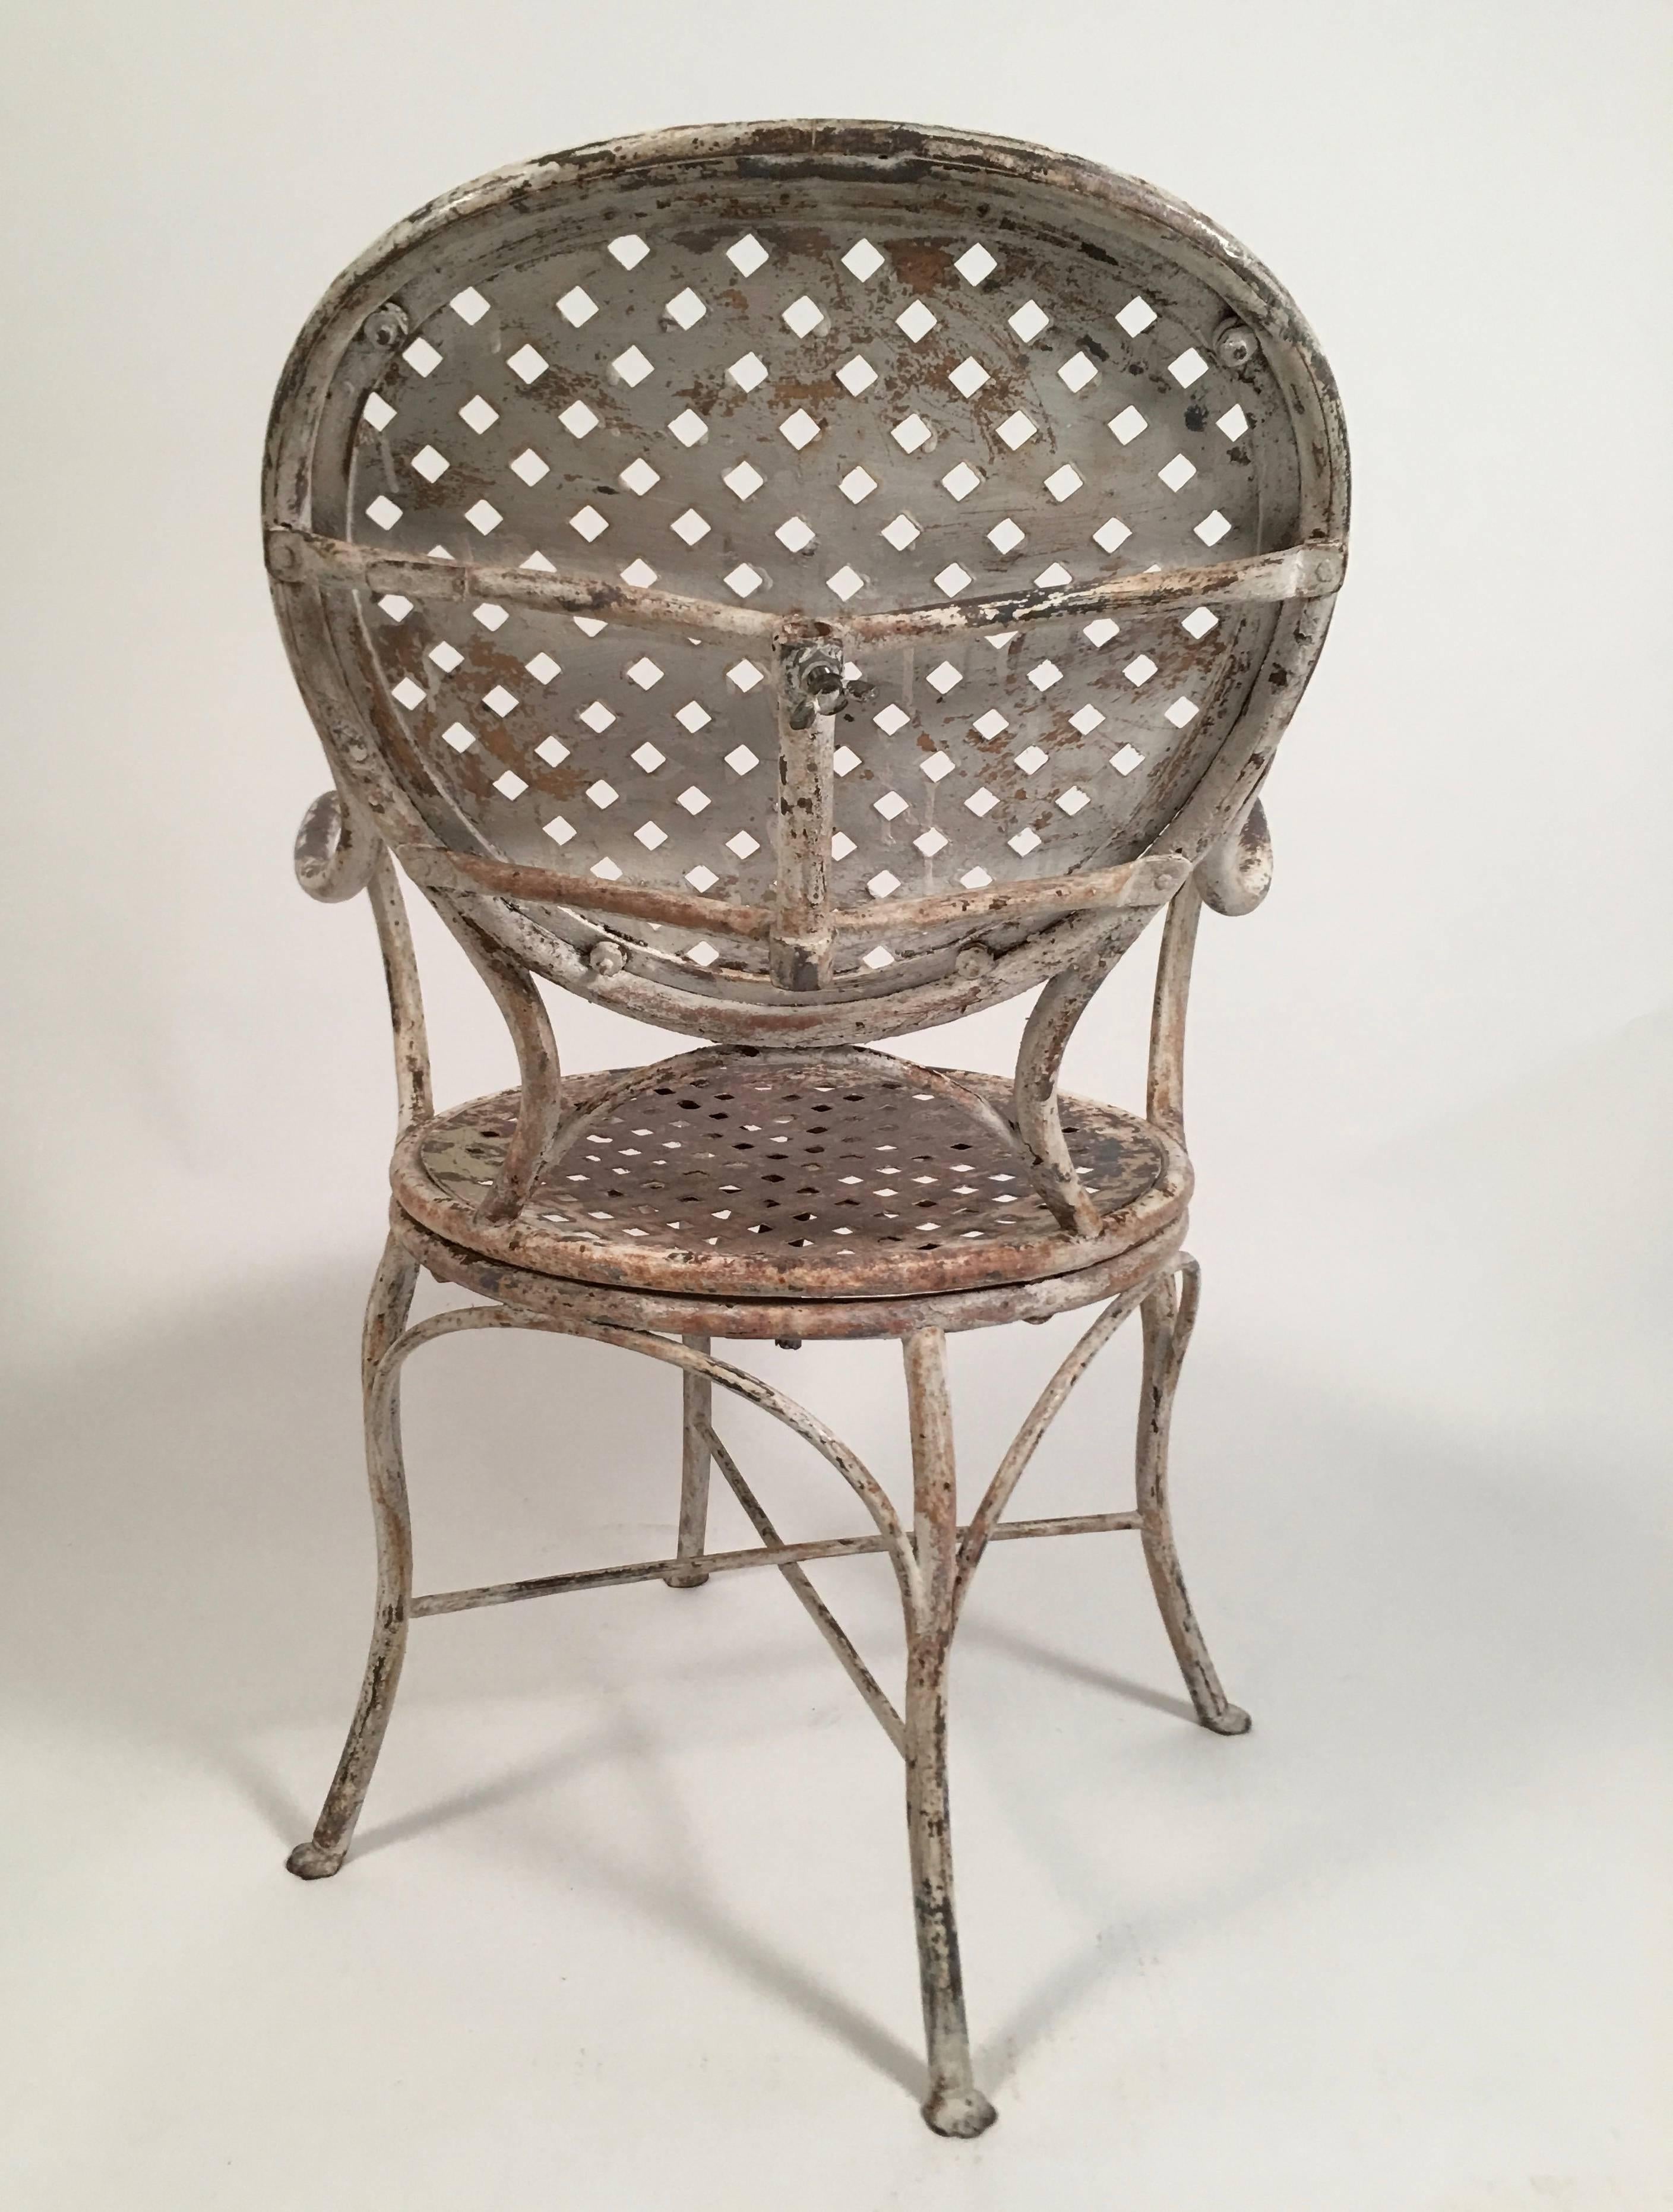 Painted French  Iron Garden Chair with Adjustable and Removable Umbrella, circa 1920s